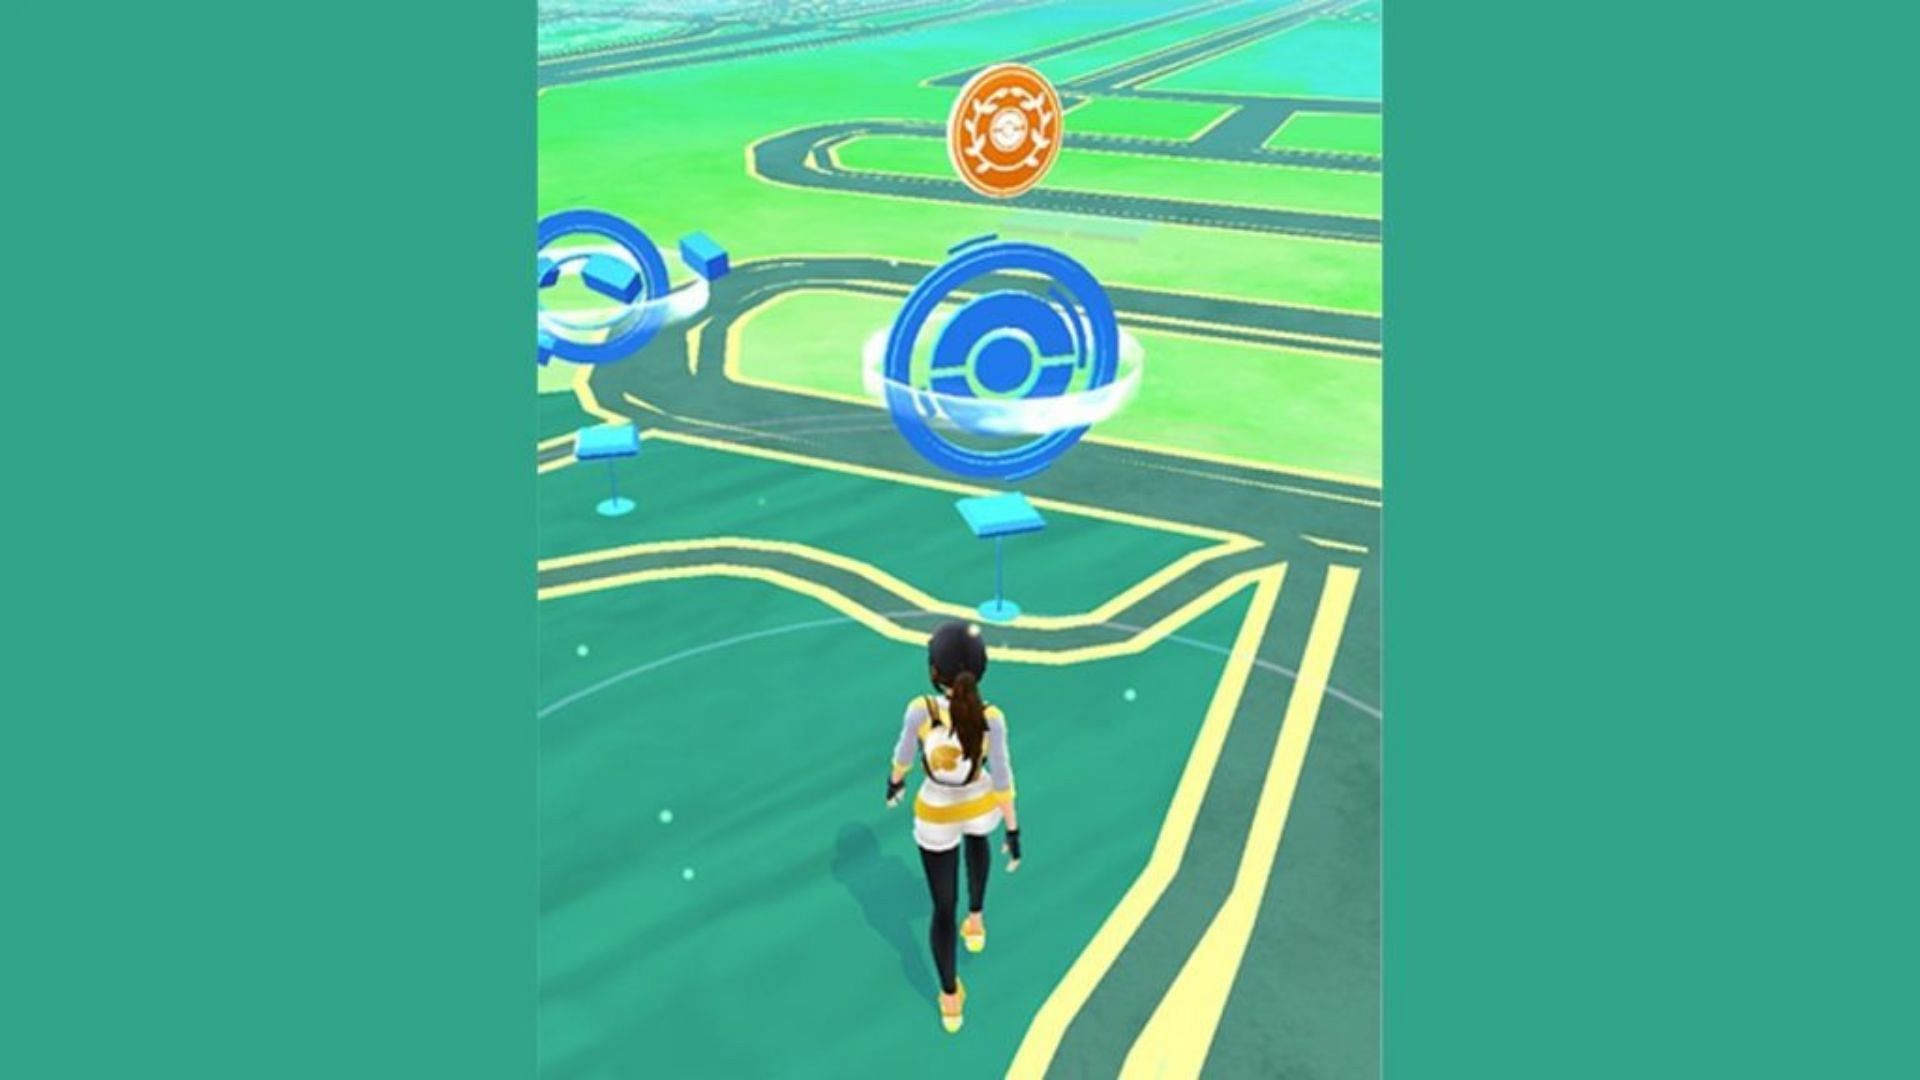 5 things to know about PokeStop Showcase in Pokemon GO